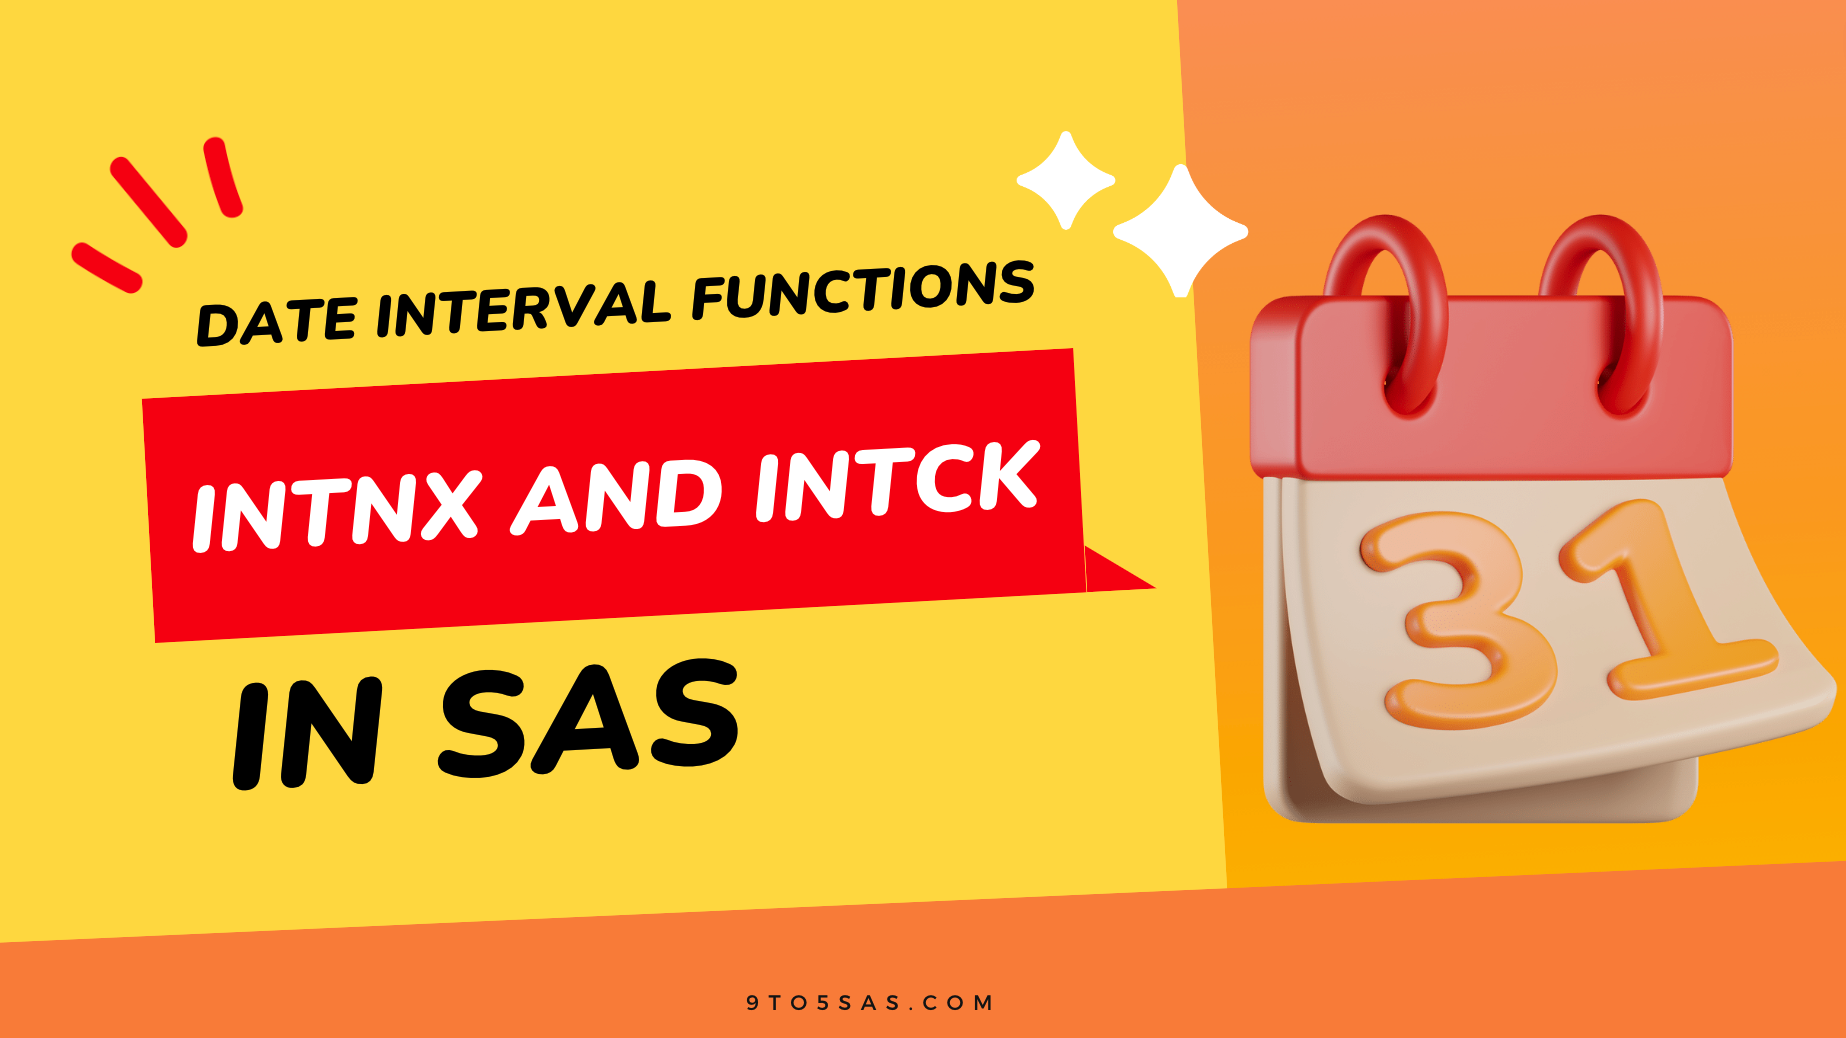 INTNX and INTCK in SAS